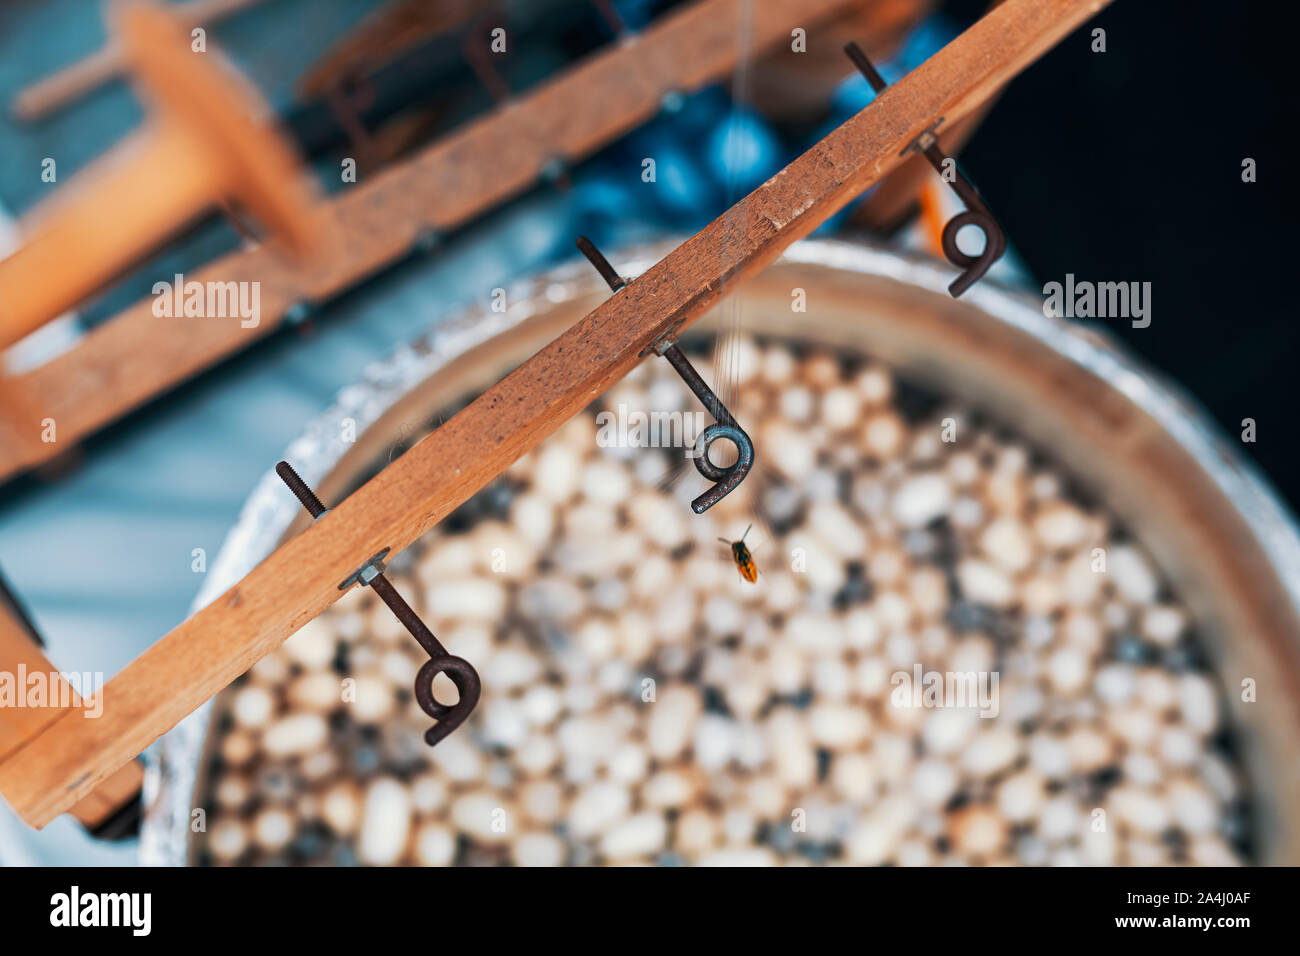 silkworm cocoons in hot water in cauldron. Traditional spinning wheel machine for making natural silk from silkworm. Silk reeling process. Stock Photo